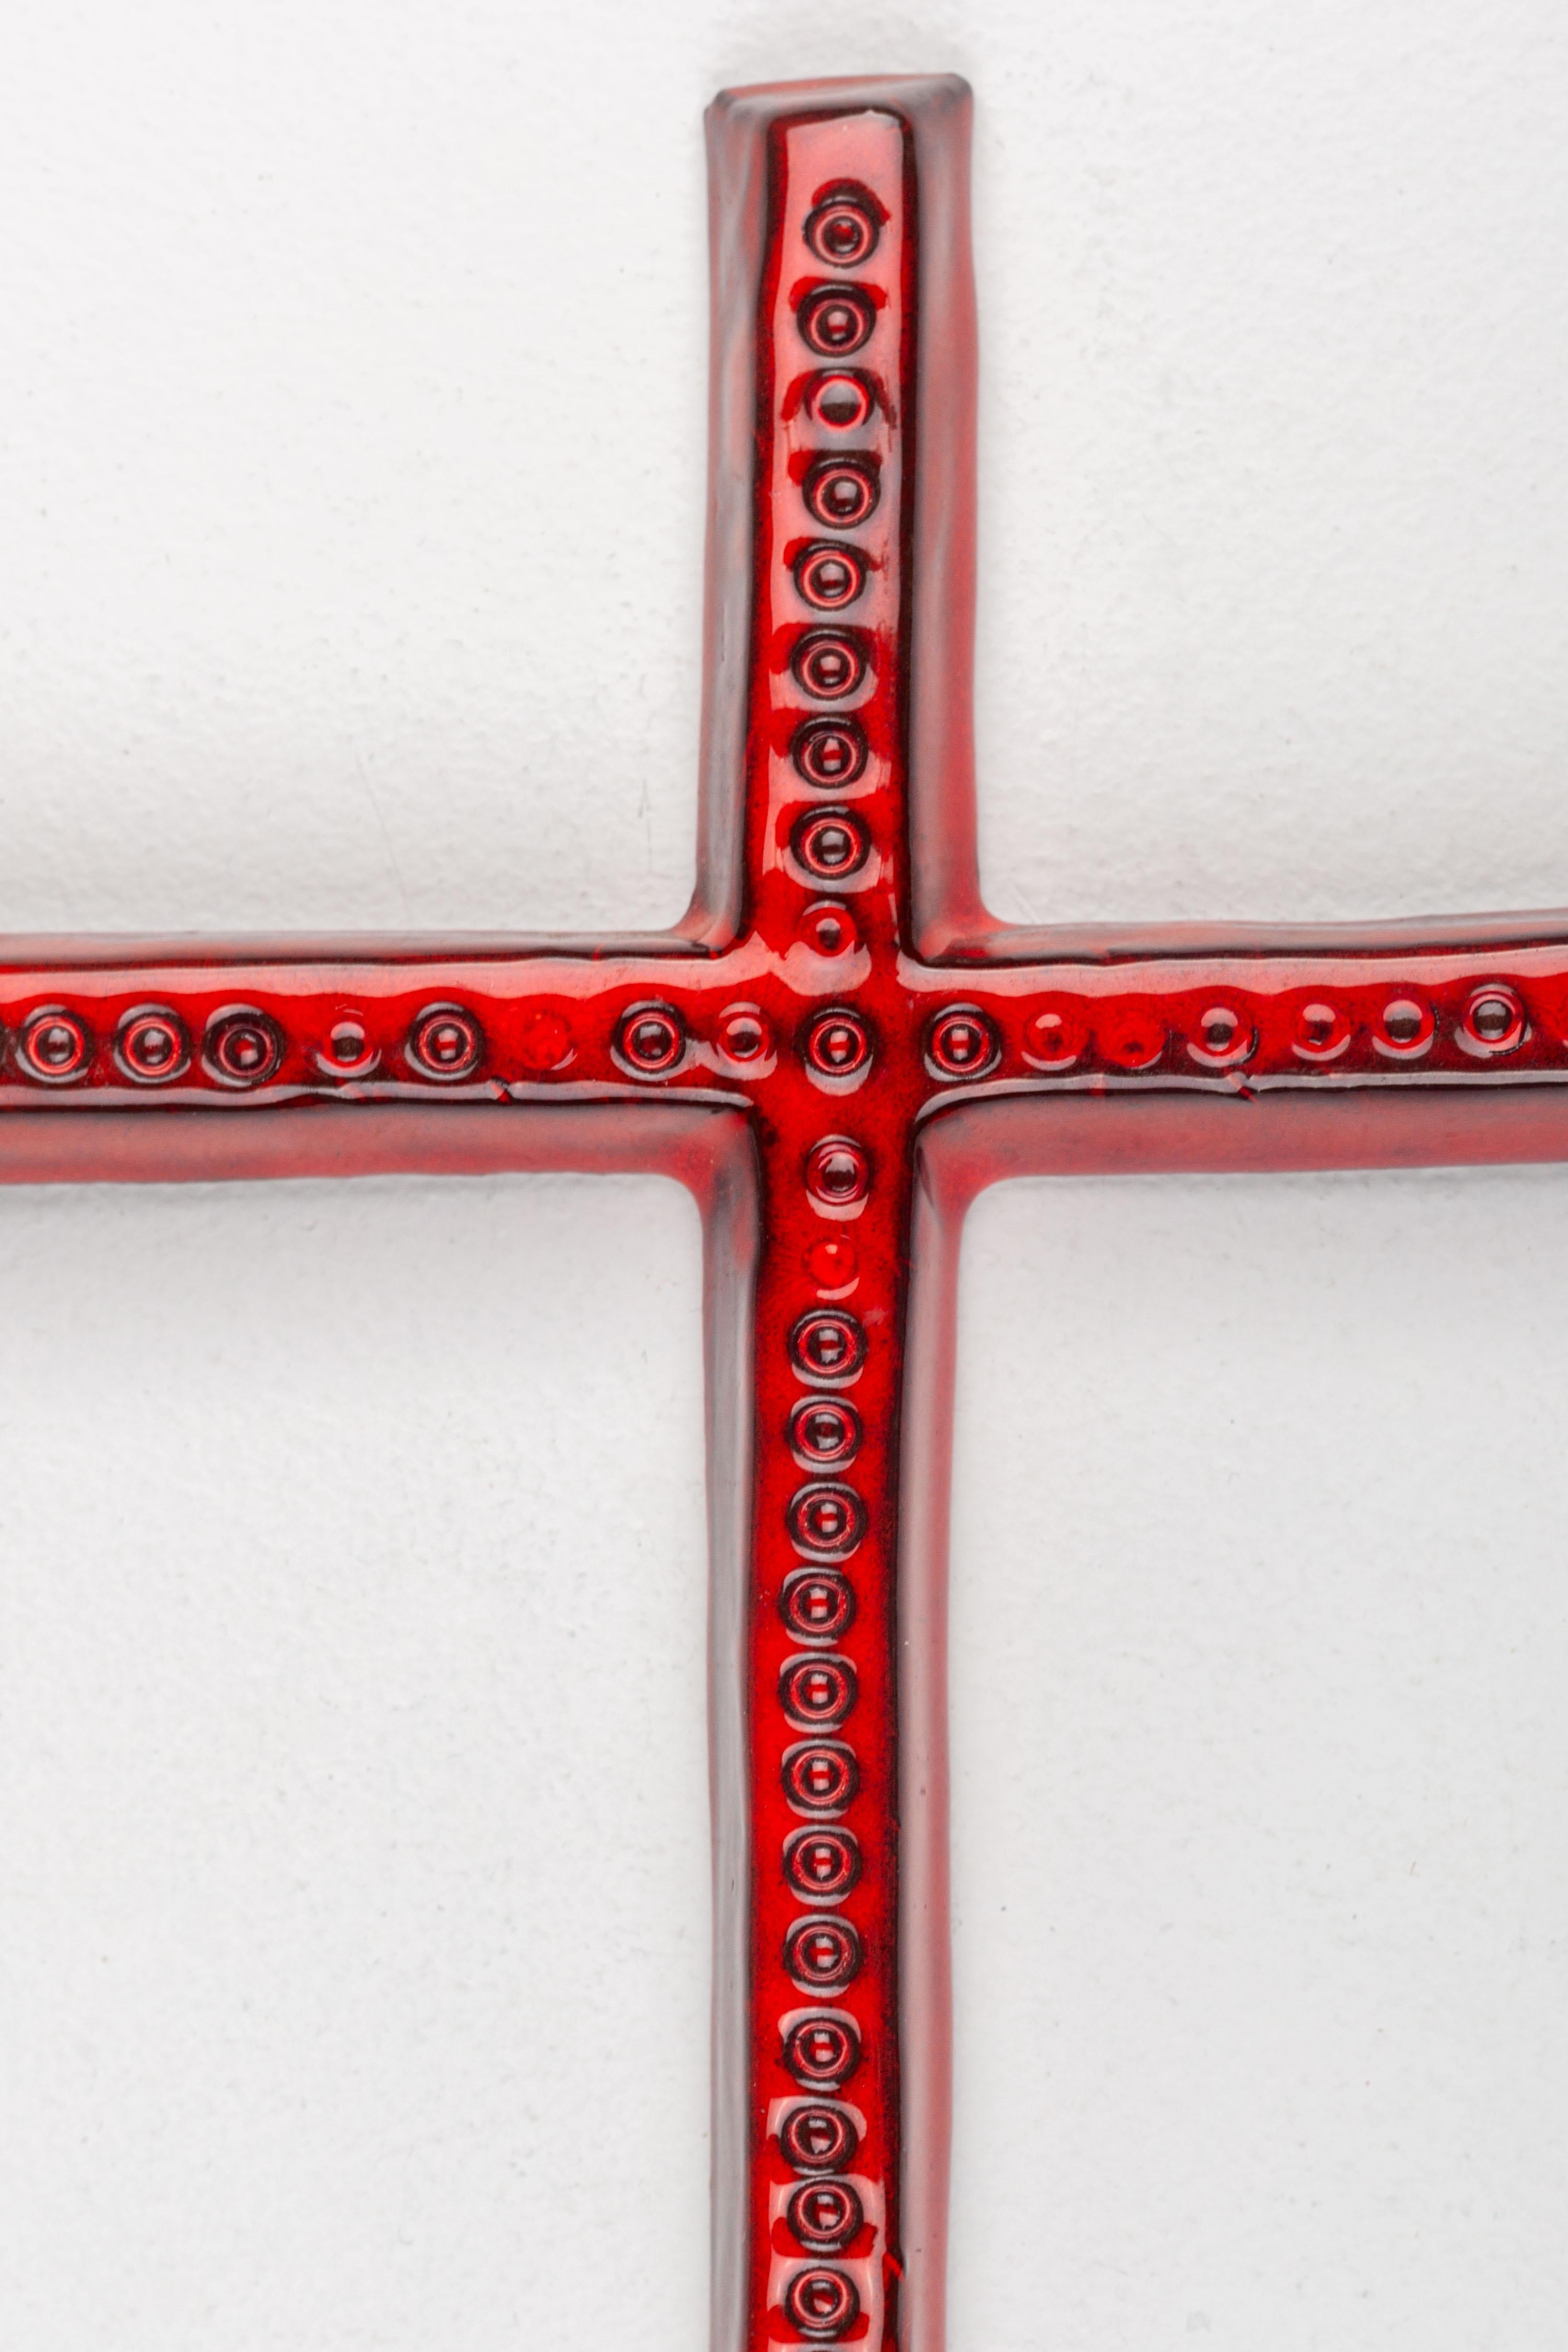 This modernist European Studio Pottery ceramic wall cross is characterized by its slender form and glossy red finish, adorned with an embossed circles pattern that spans the entire cross's face, reminding elements of early Christianism. The vibrant